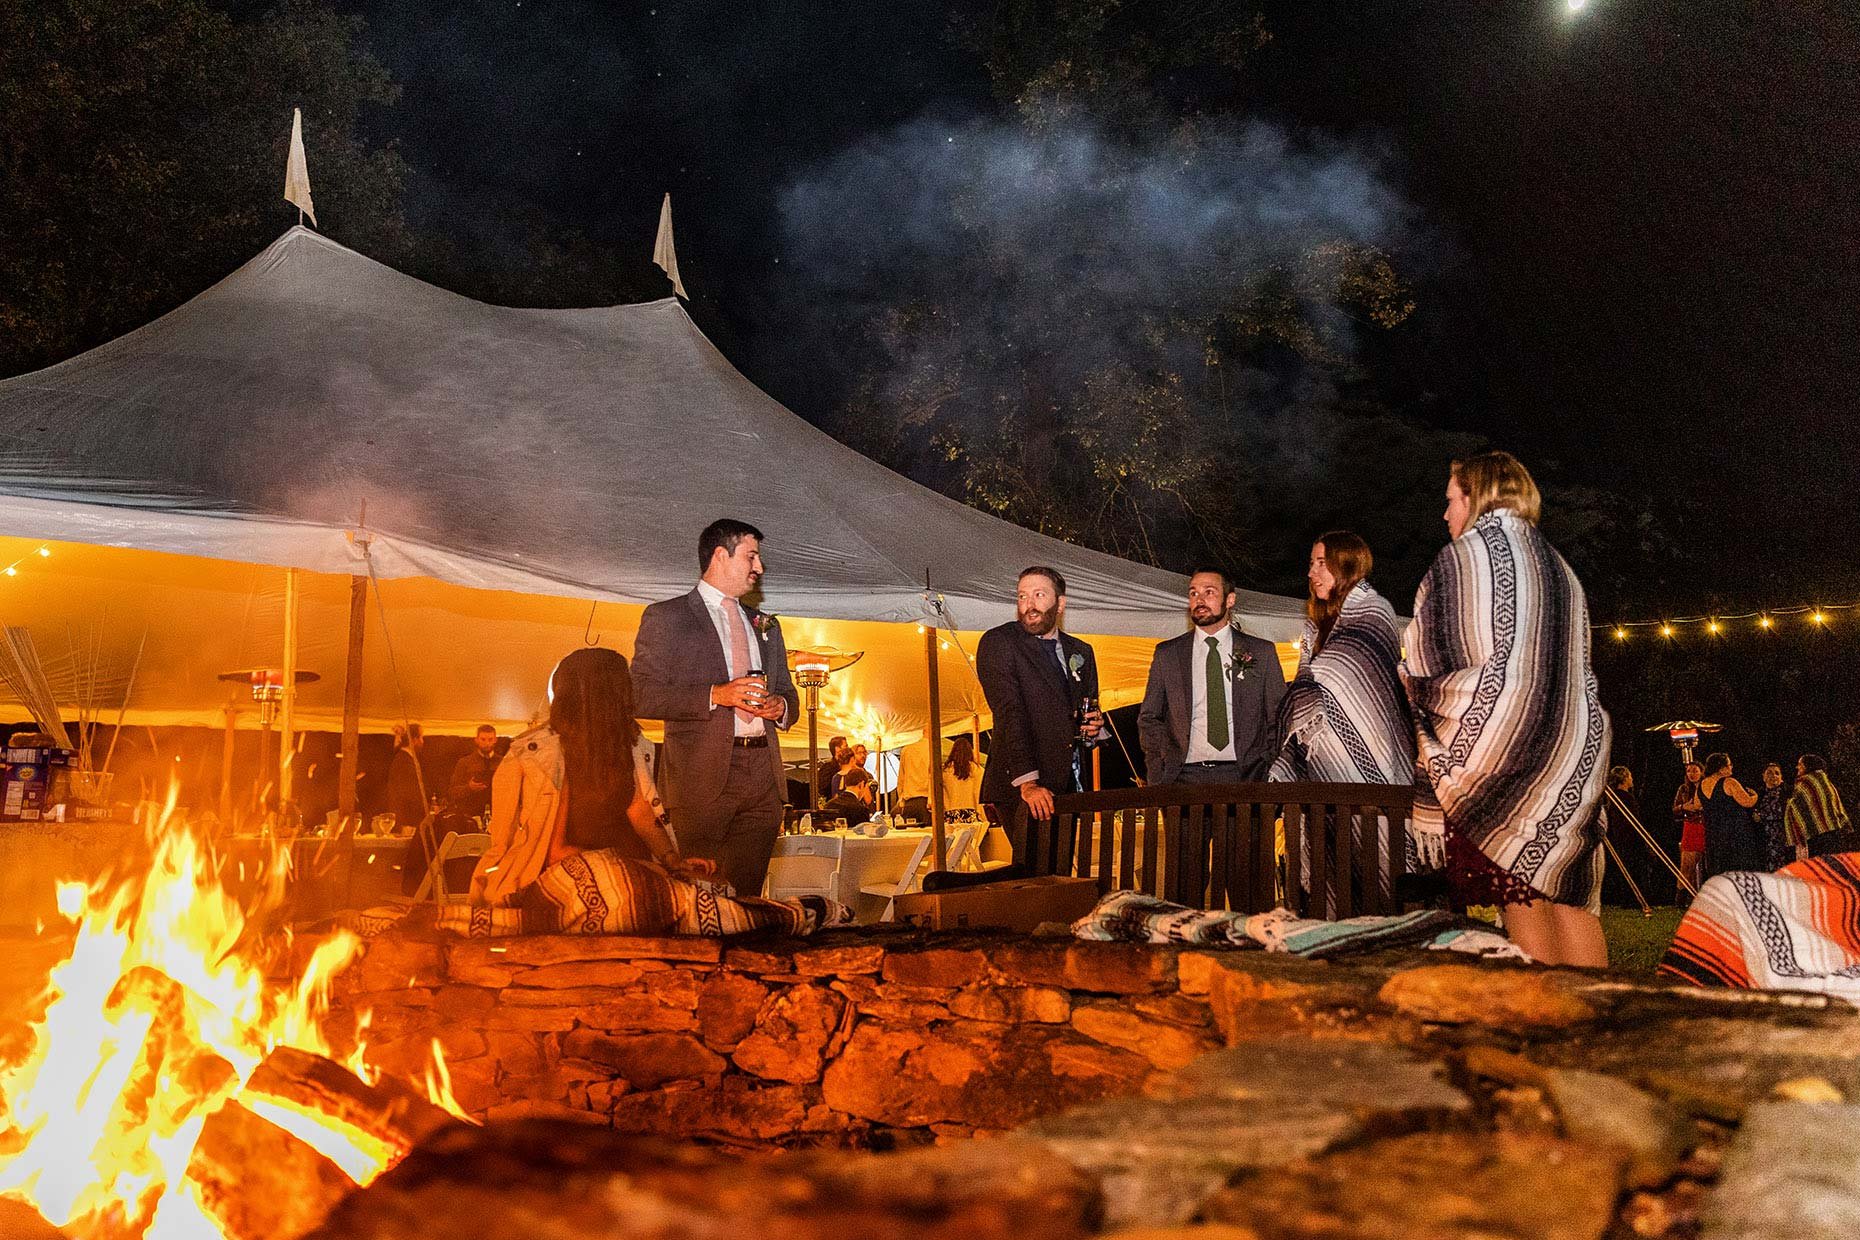 Groom at Fire pit at Wedding Reception 